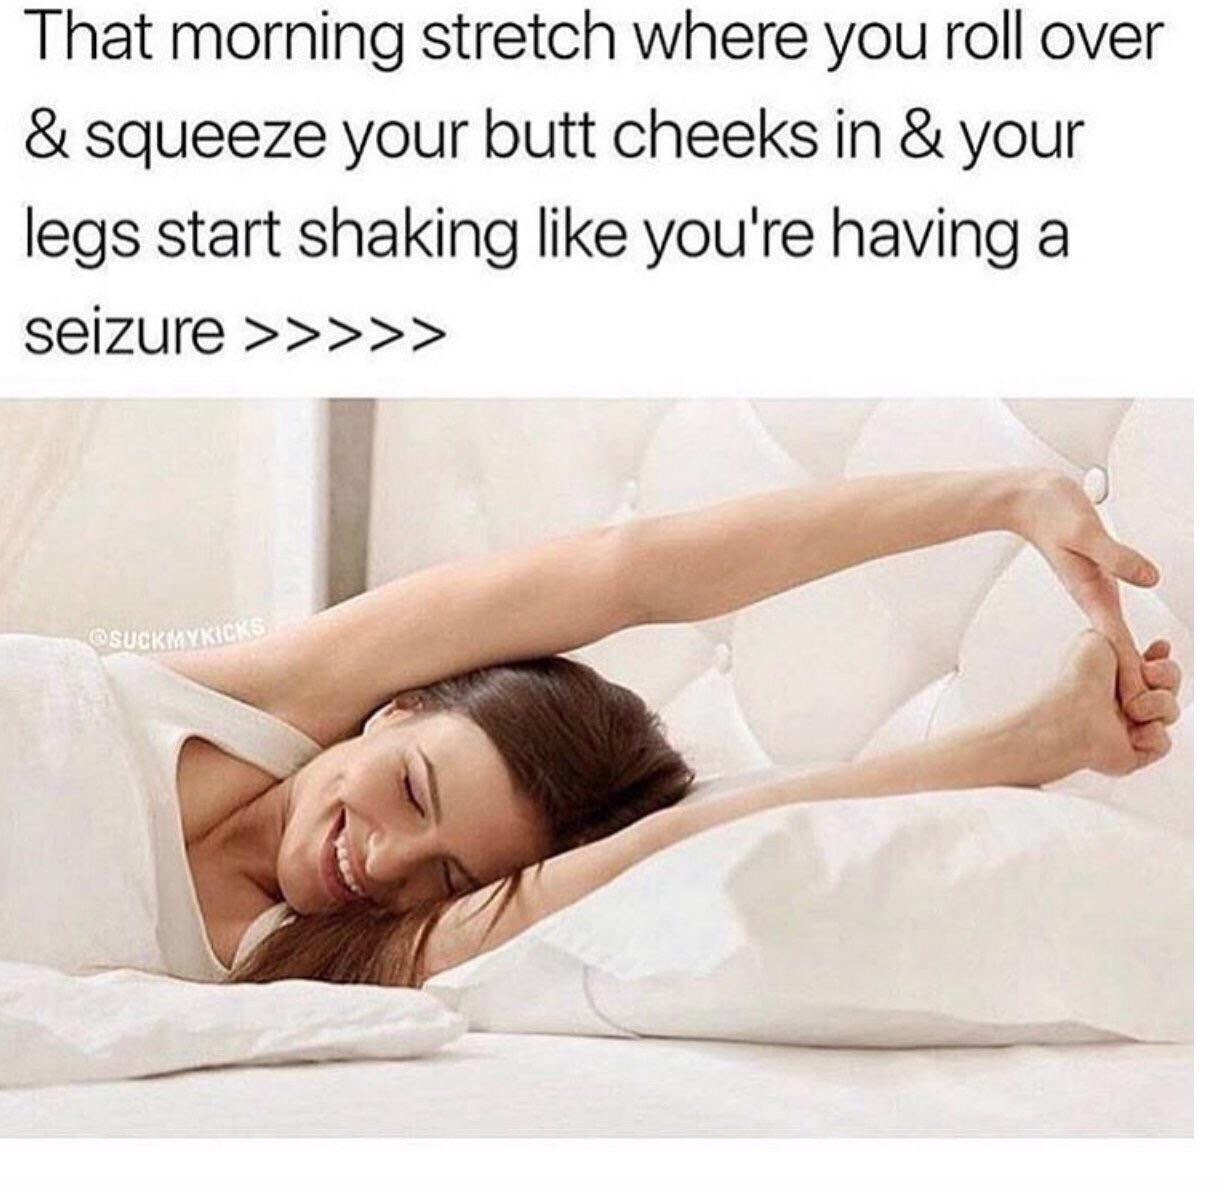 you stretch in the morning meme - That morning stretch where you roll over & squeeze your butt cheeks in & your legs start shaking you're having a seizure >>>>>